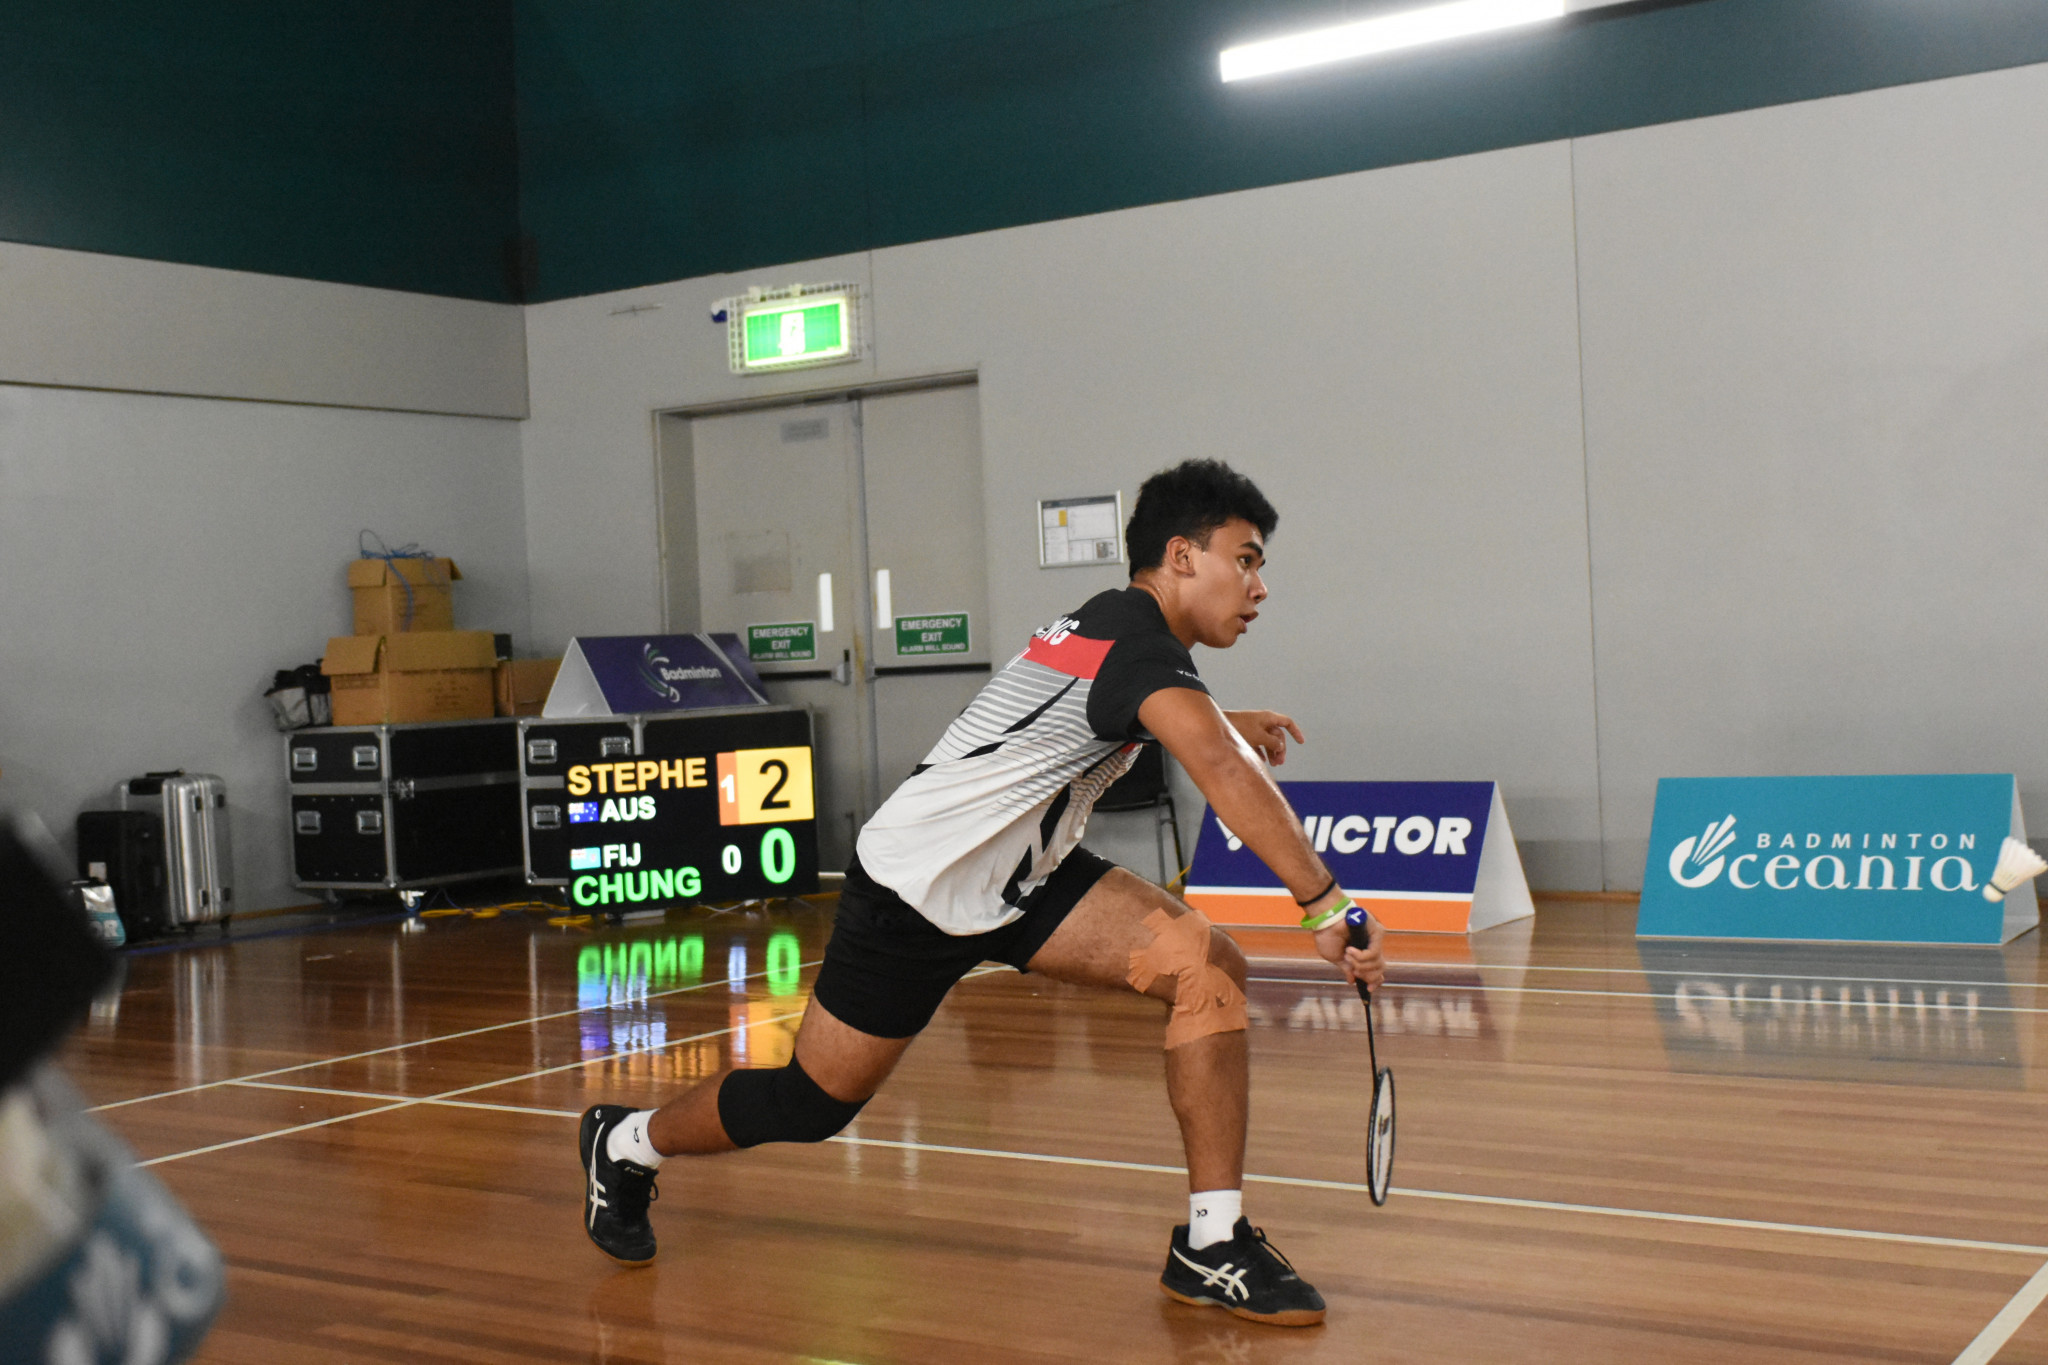 Jared Chung suffered a straight game defeat to home favourite Ephraim Stephen Sam ©Badminton Victoria